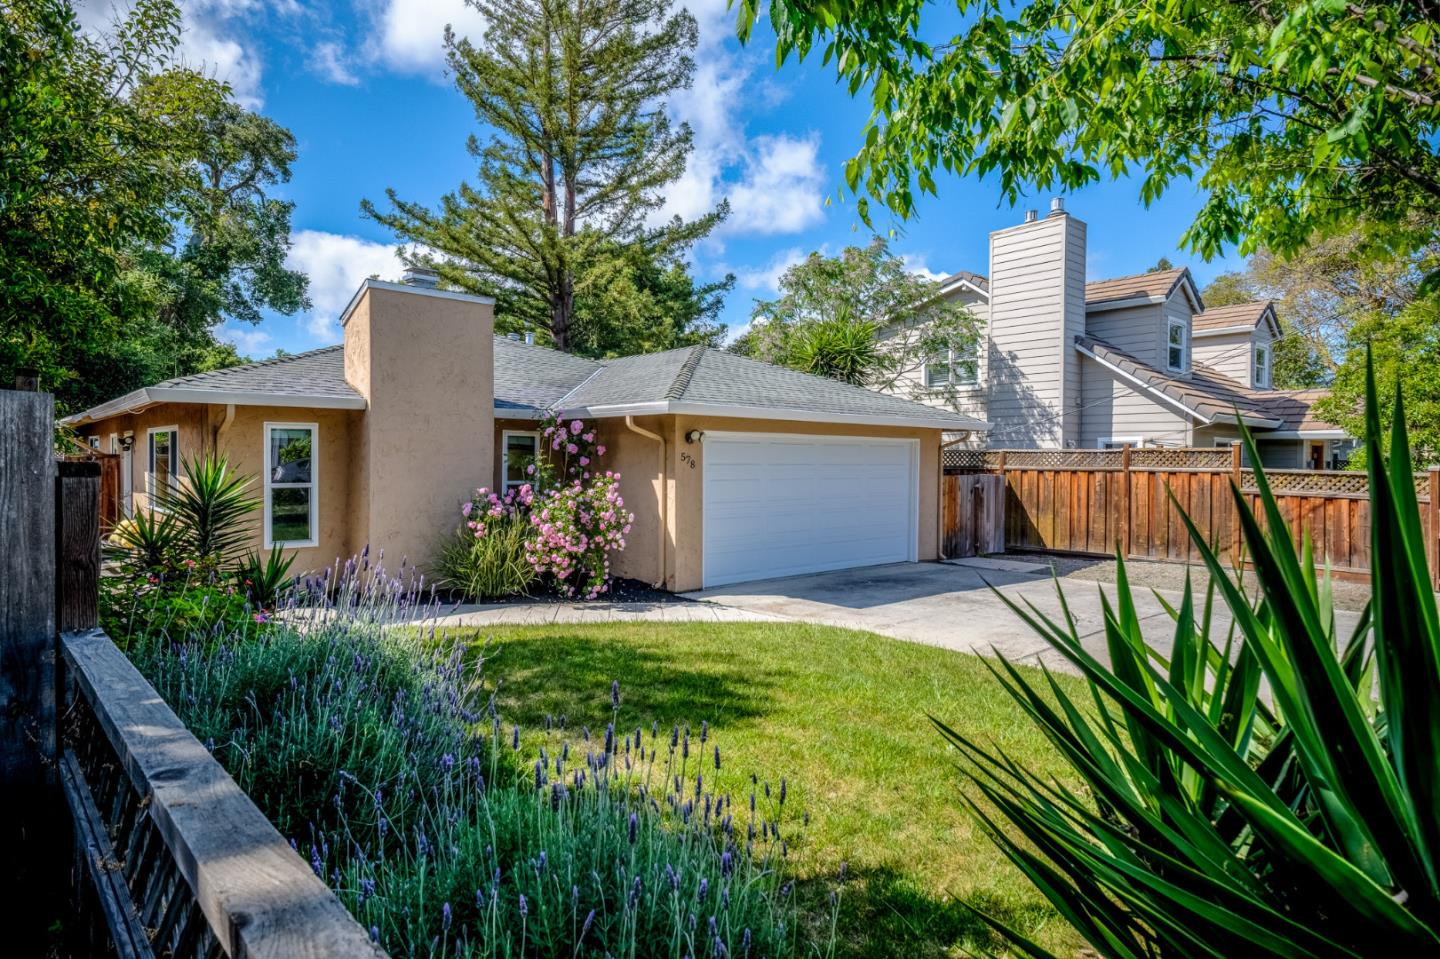 Photo of 578 Maybell Ave in Palo Alto, CA